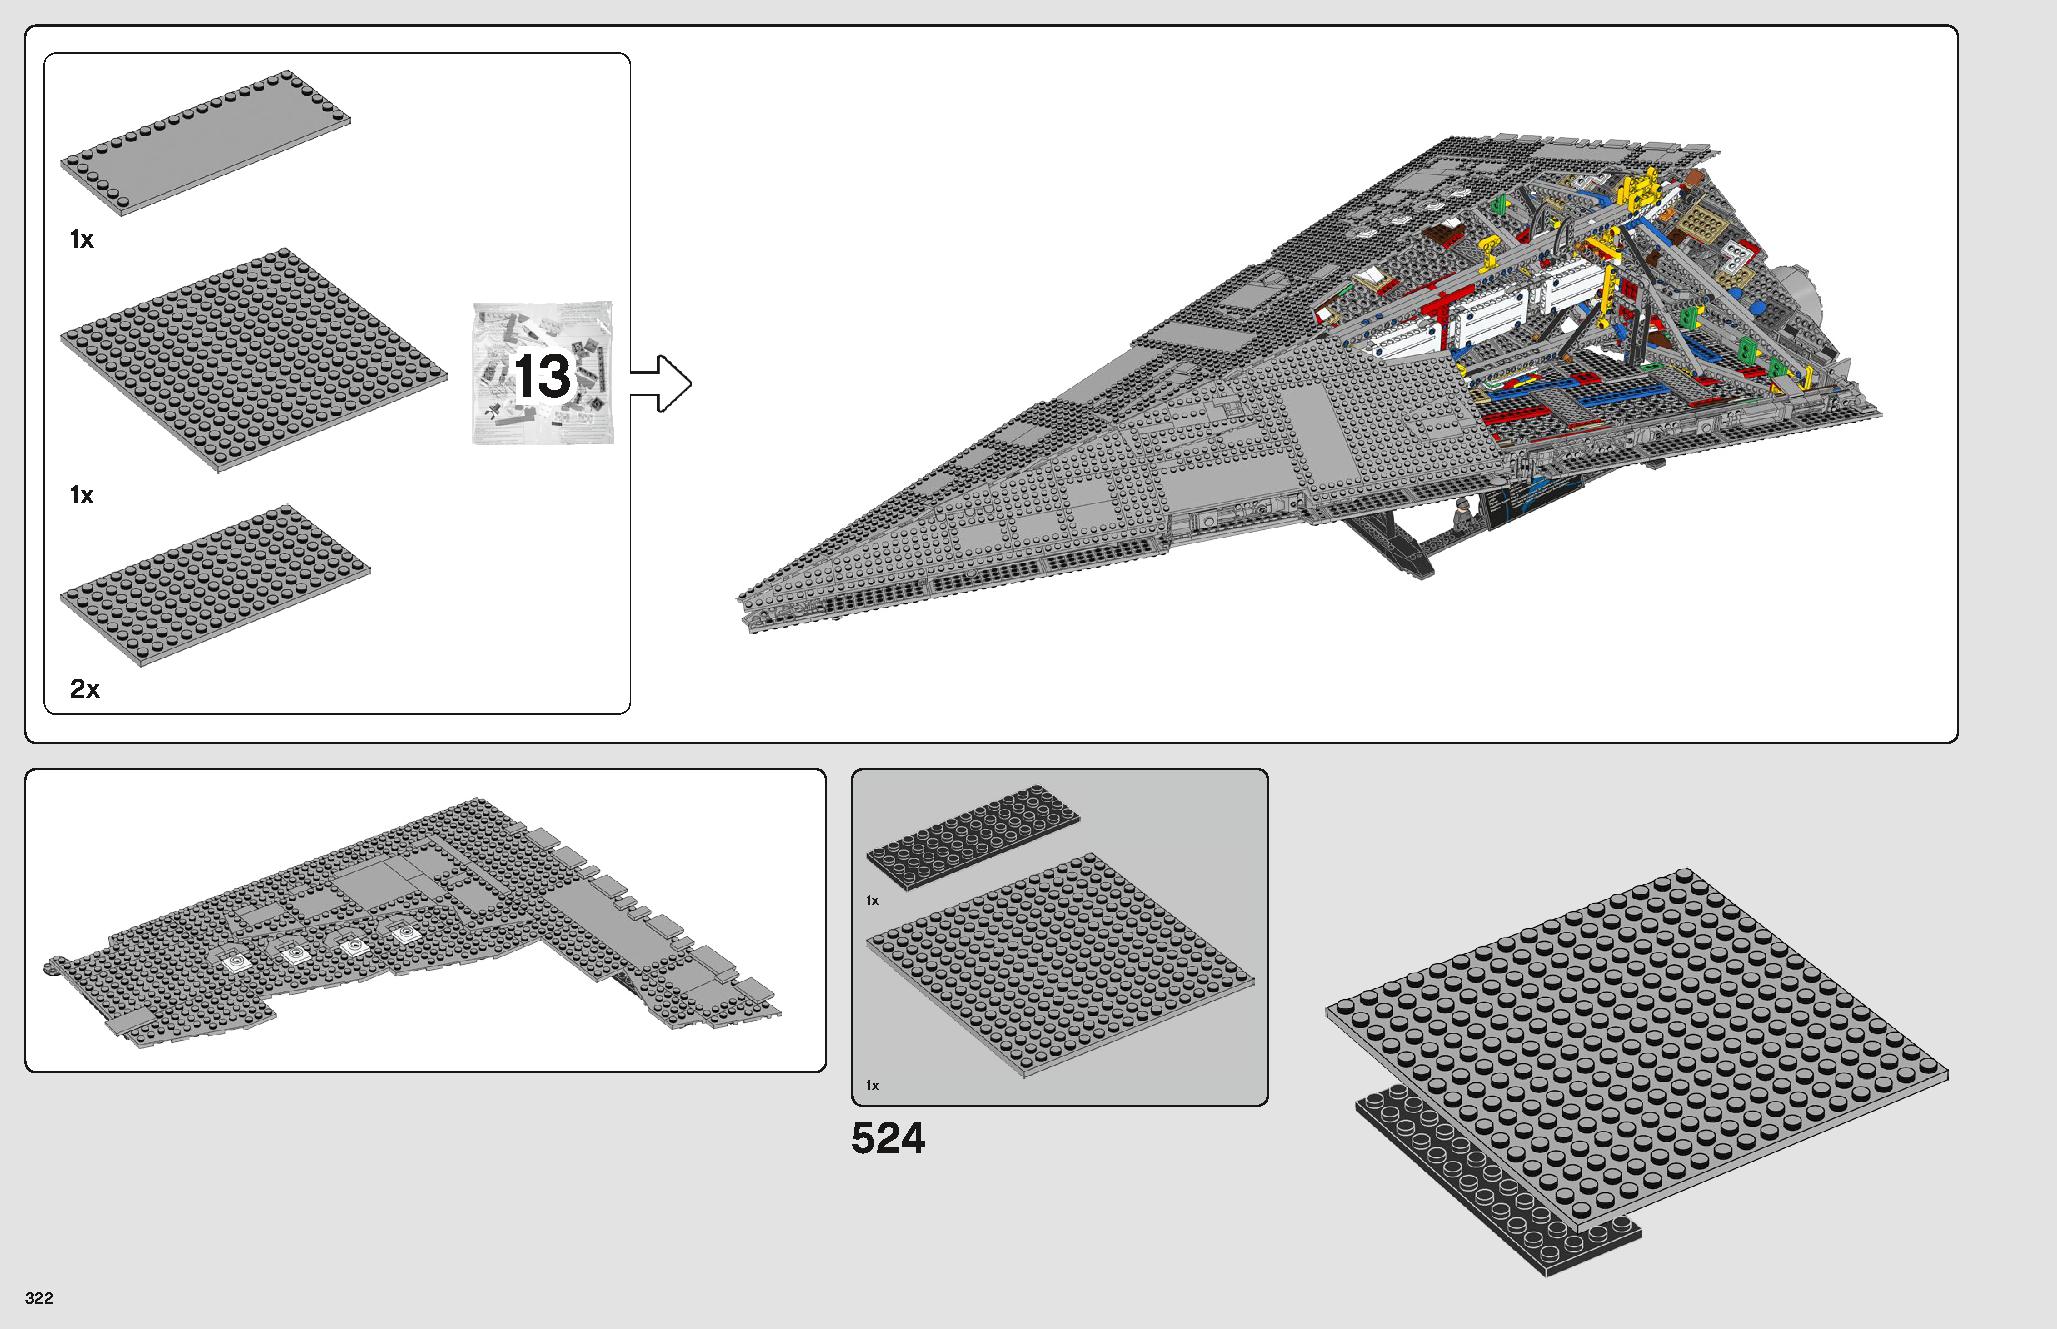 Imperial Star Destroyer 75252 レゴの商品情報 レゴの説明書・組立方法 322 page